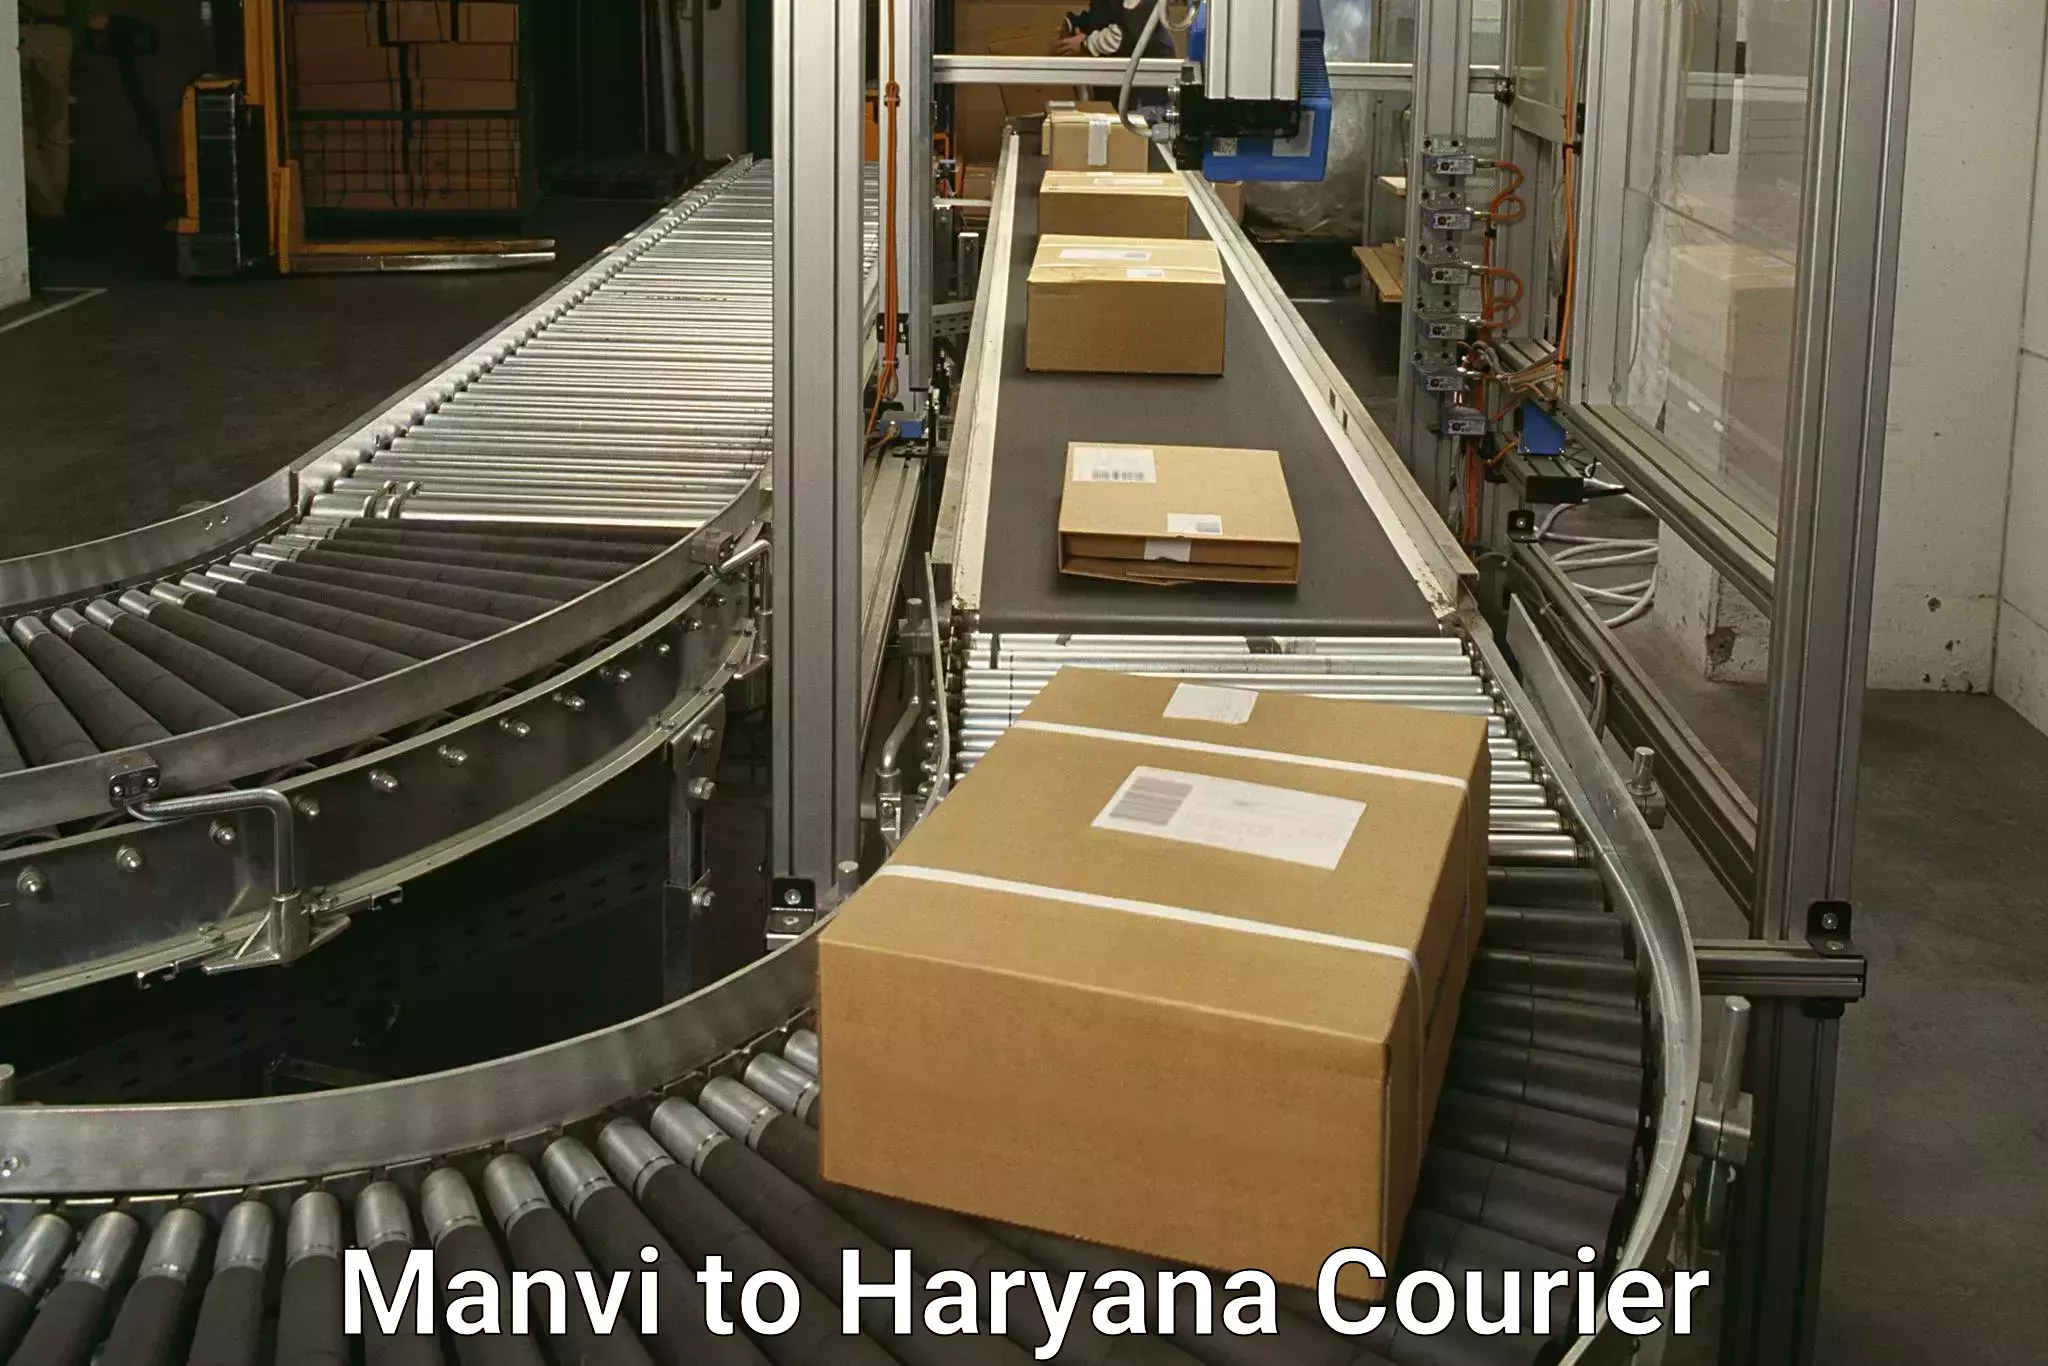 Global freight services Manvi to NCR Haryana